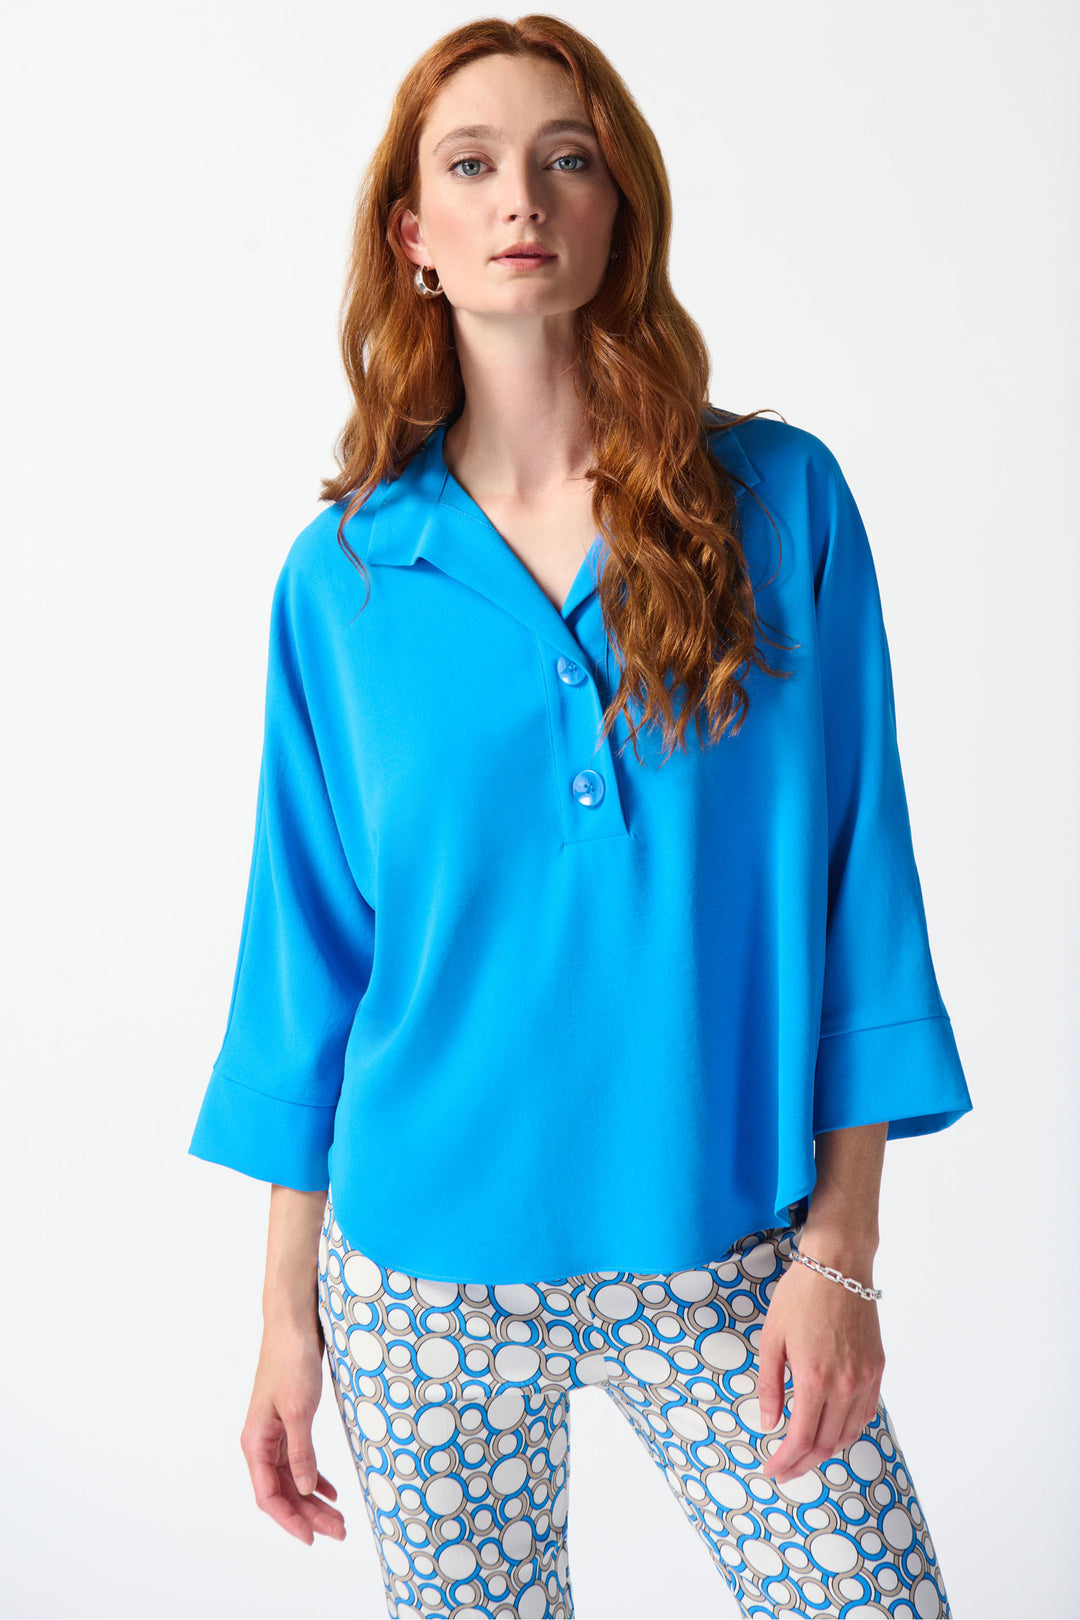 JOSEPH RIBKOFF Spring 2024 Featuring 2 bold front buttons and a relaxed fit, this top exudes effortless style. 